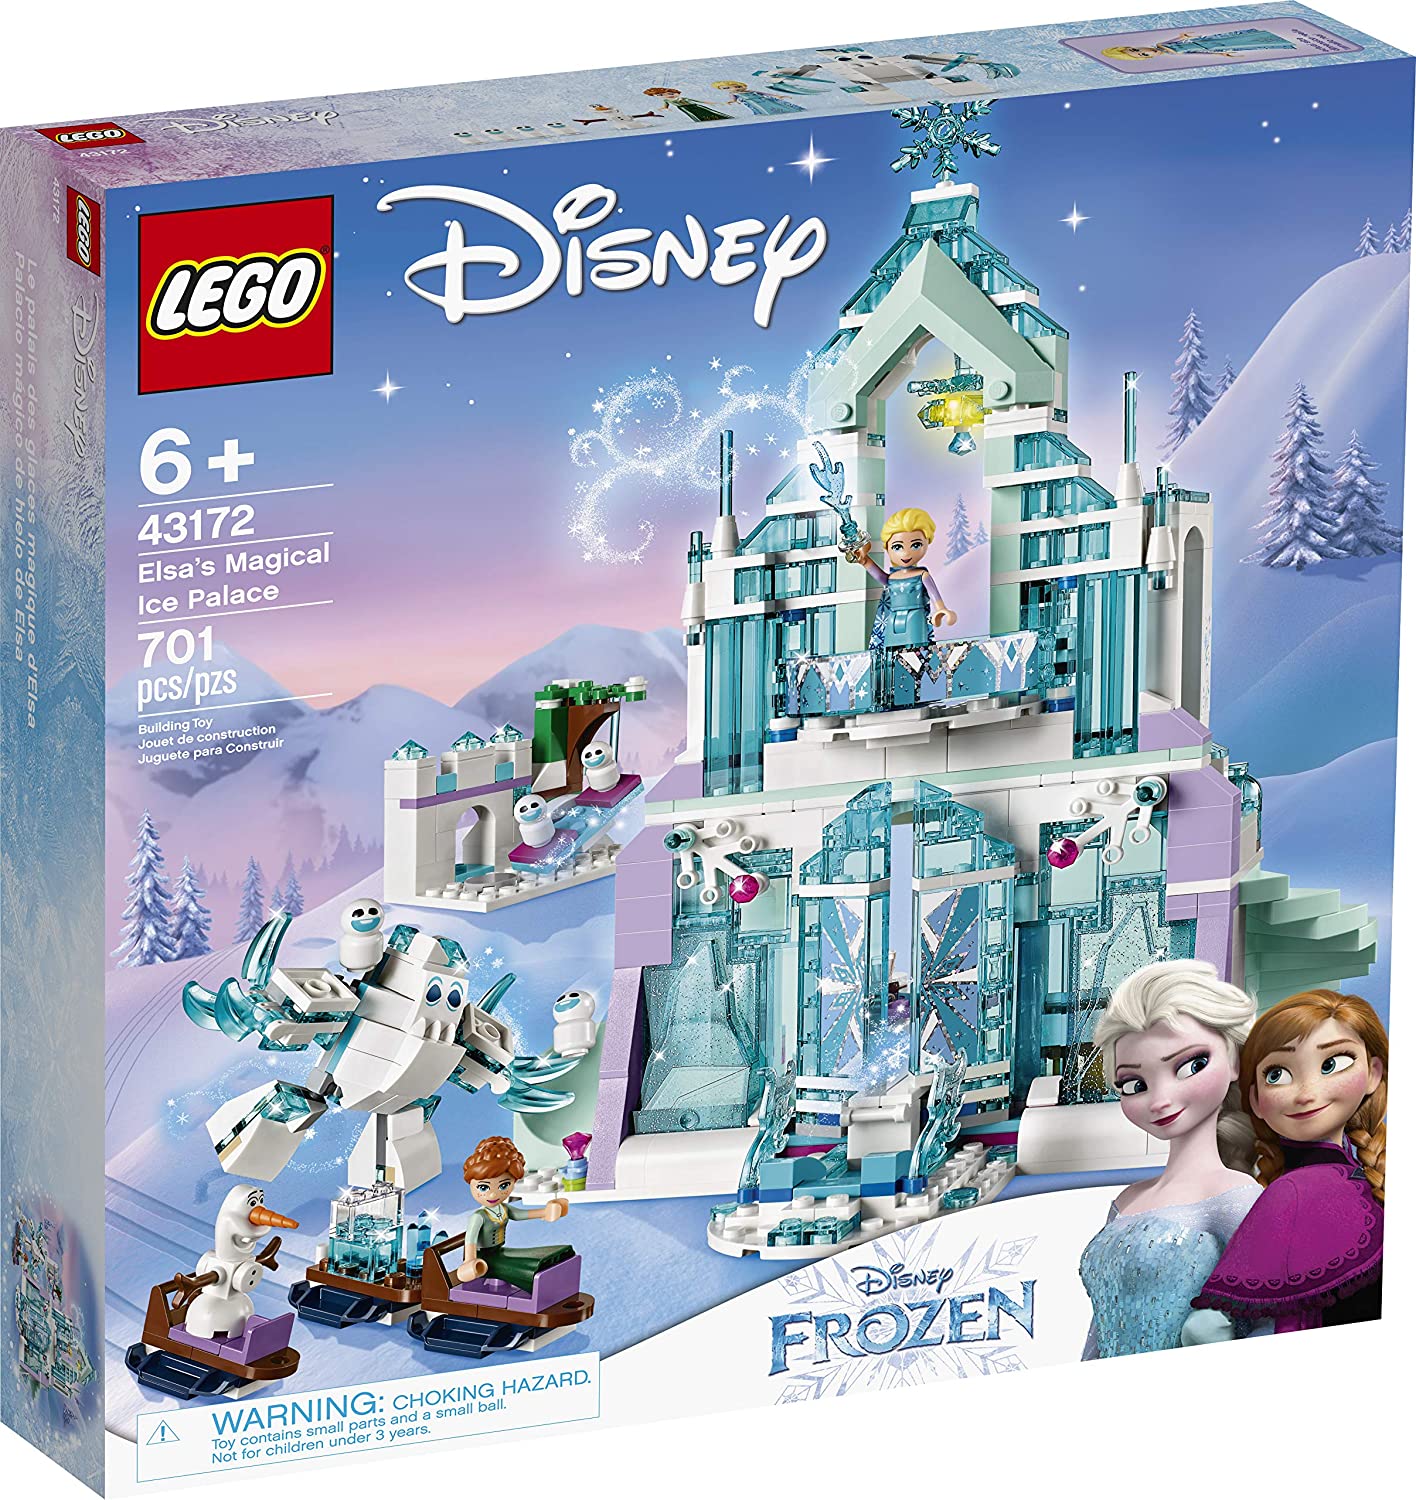 From Denmark】LEGO Disney Princess Elsa Magic Ice Palace 43172 toy castle  puzzle set with mini dolls, castle toy set with famous Frozen characters,  including Aisha, Olaf, Anna, and more. (701 pieces) Guaranteed